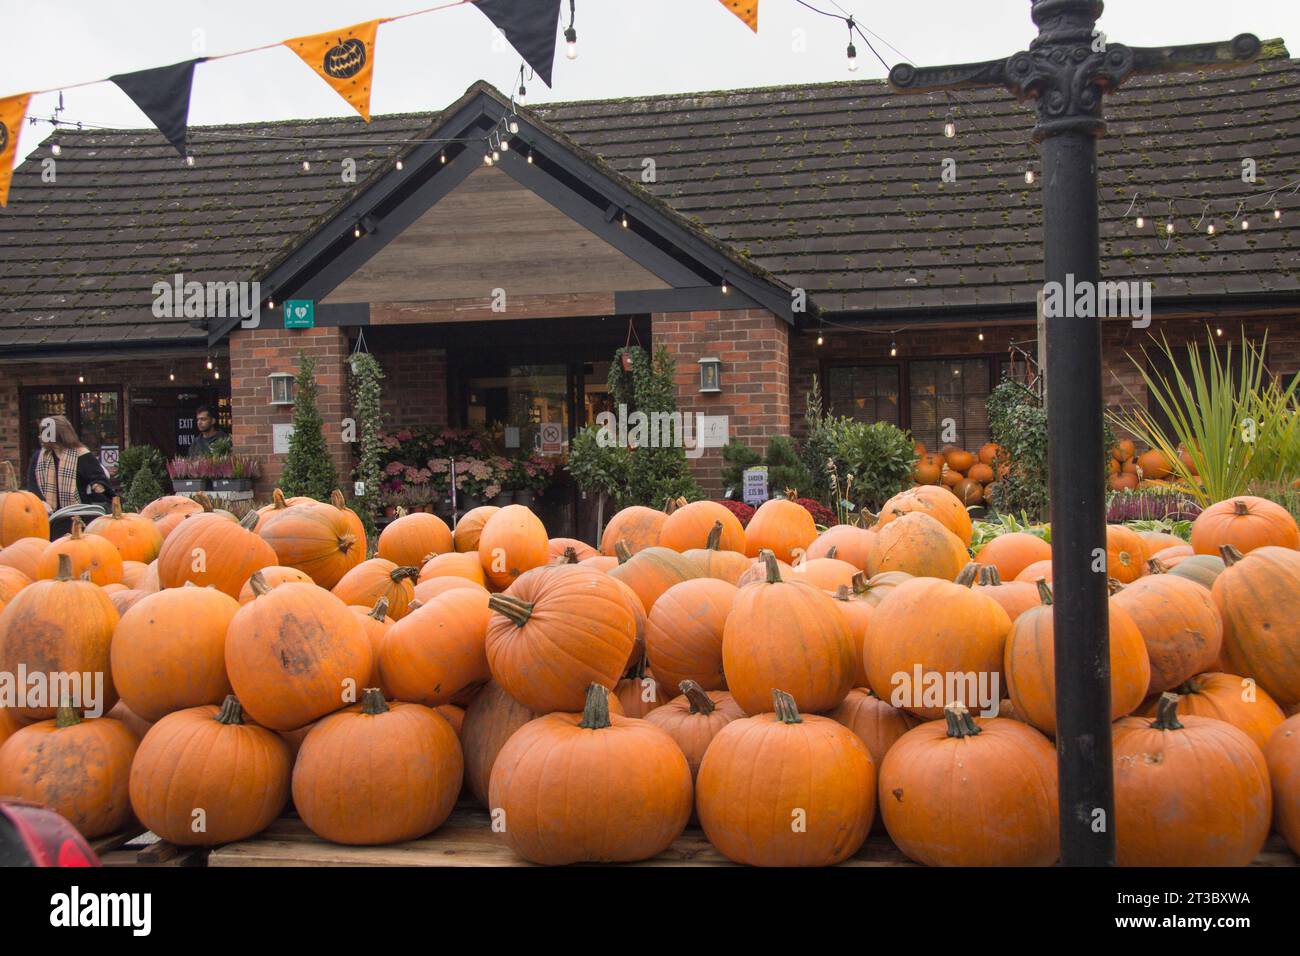 The Hollies farm shop selling pumpkins and flowers in October Stock Photo